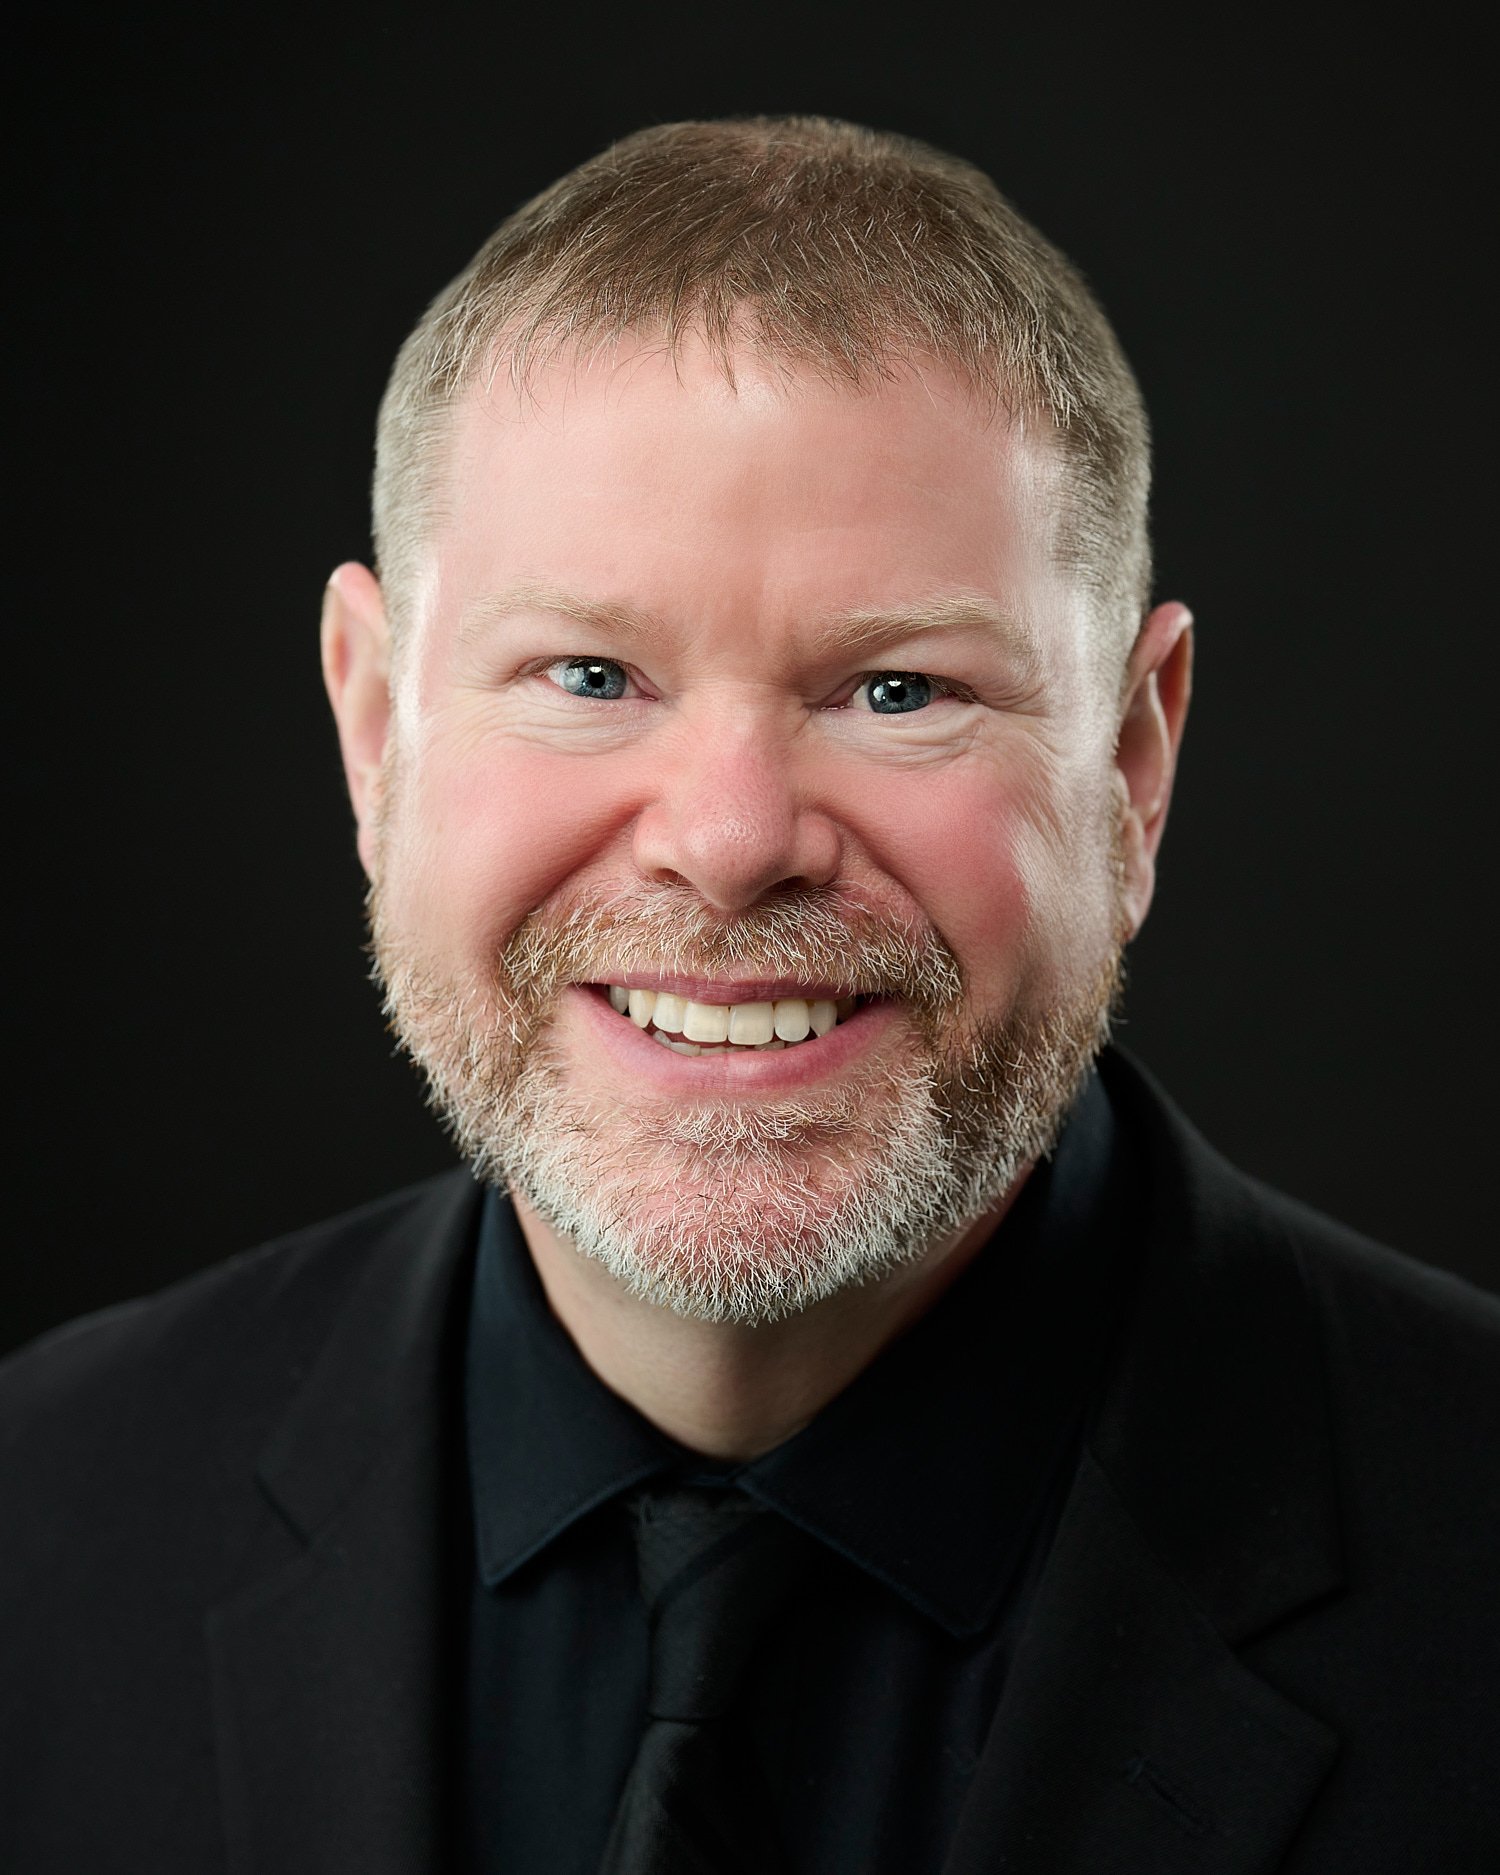  Tim Heavner is posing for his business headshots in a professional photography studio with a dark black background. Timothy is a pianist and is portrayed with his keyboard full length and close-up. 